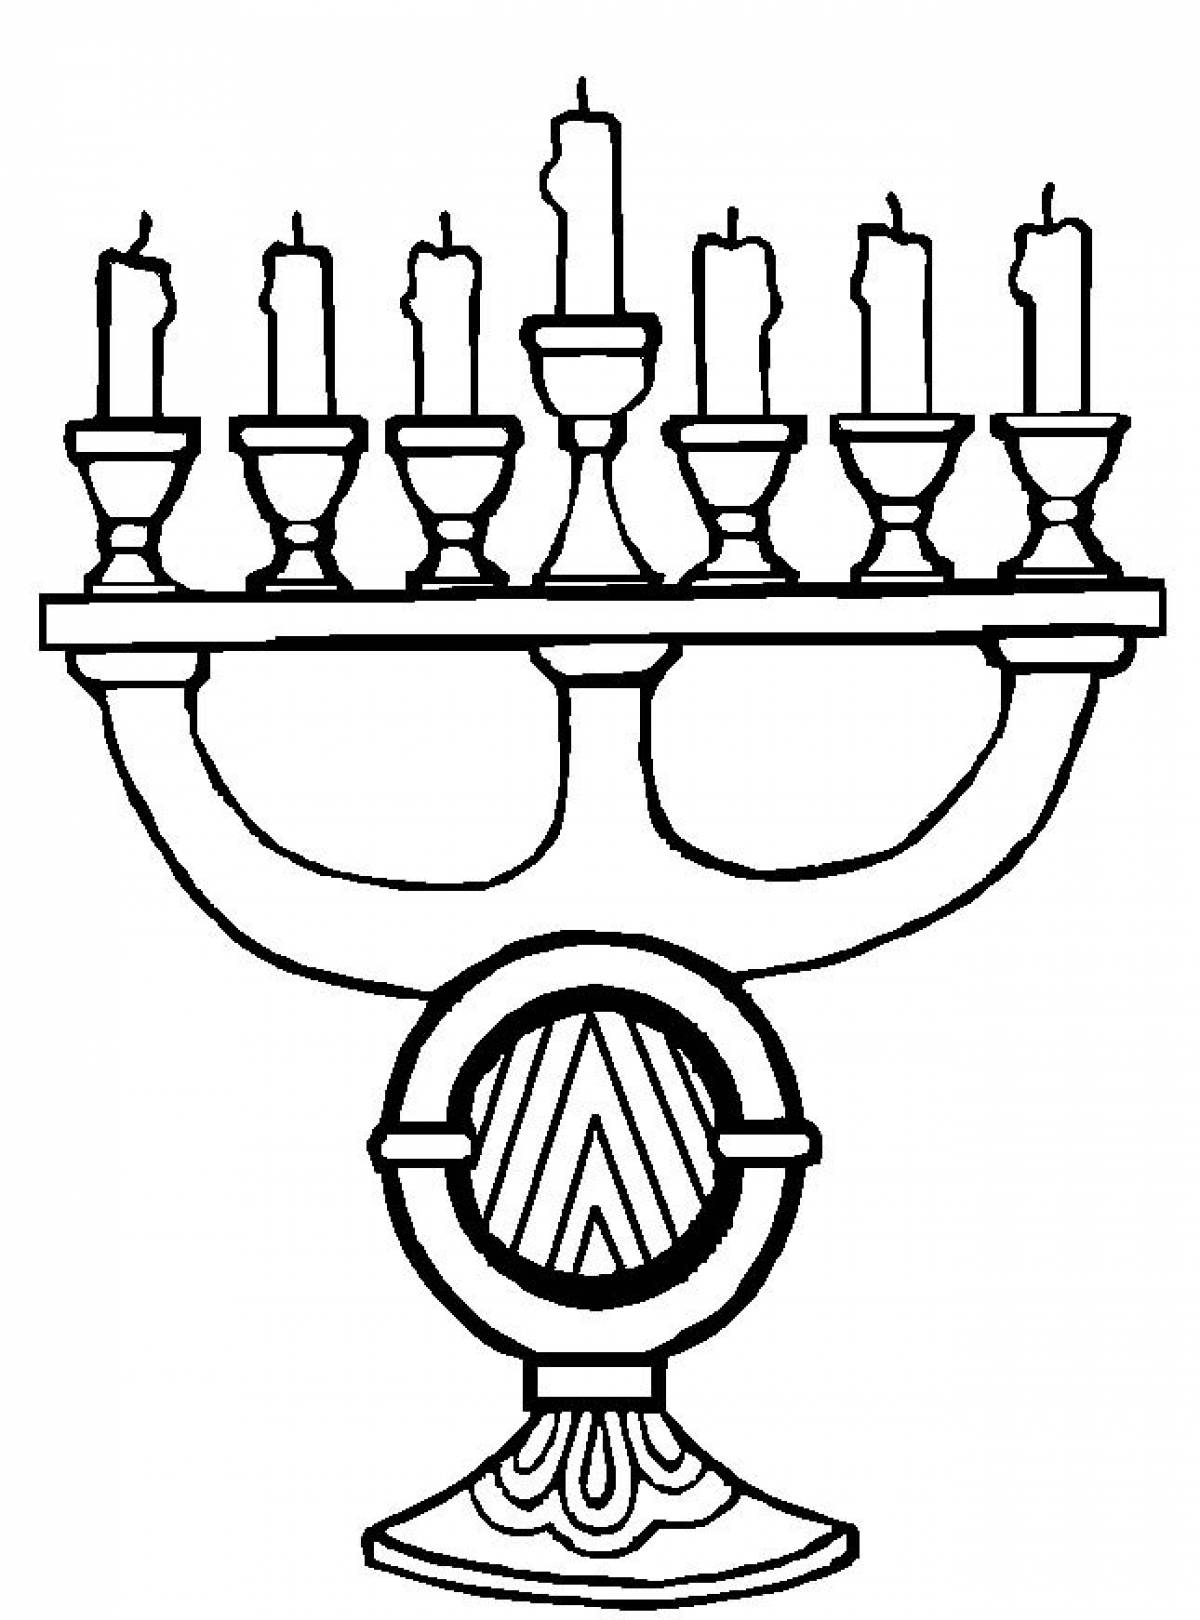 Candles in a candlestick